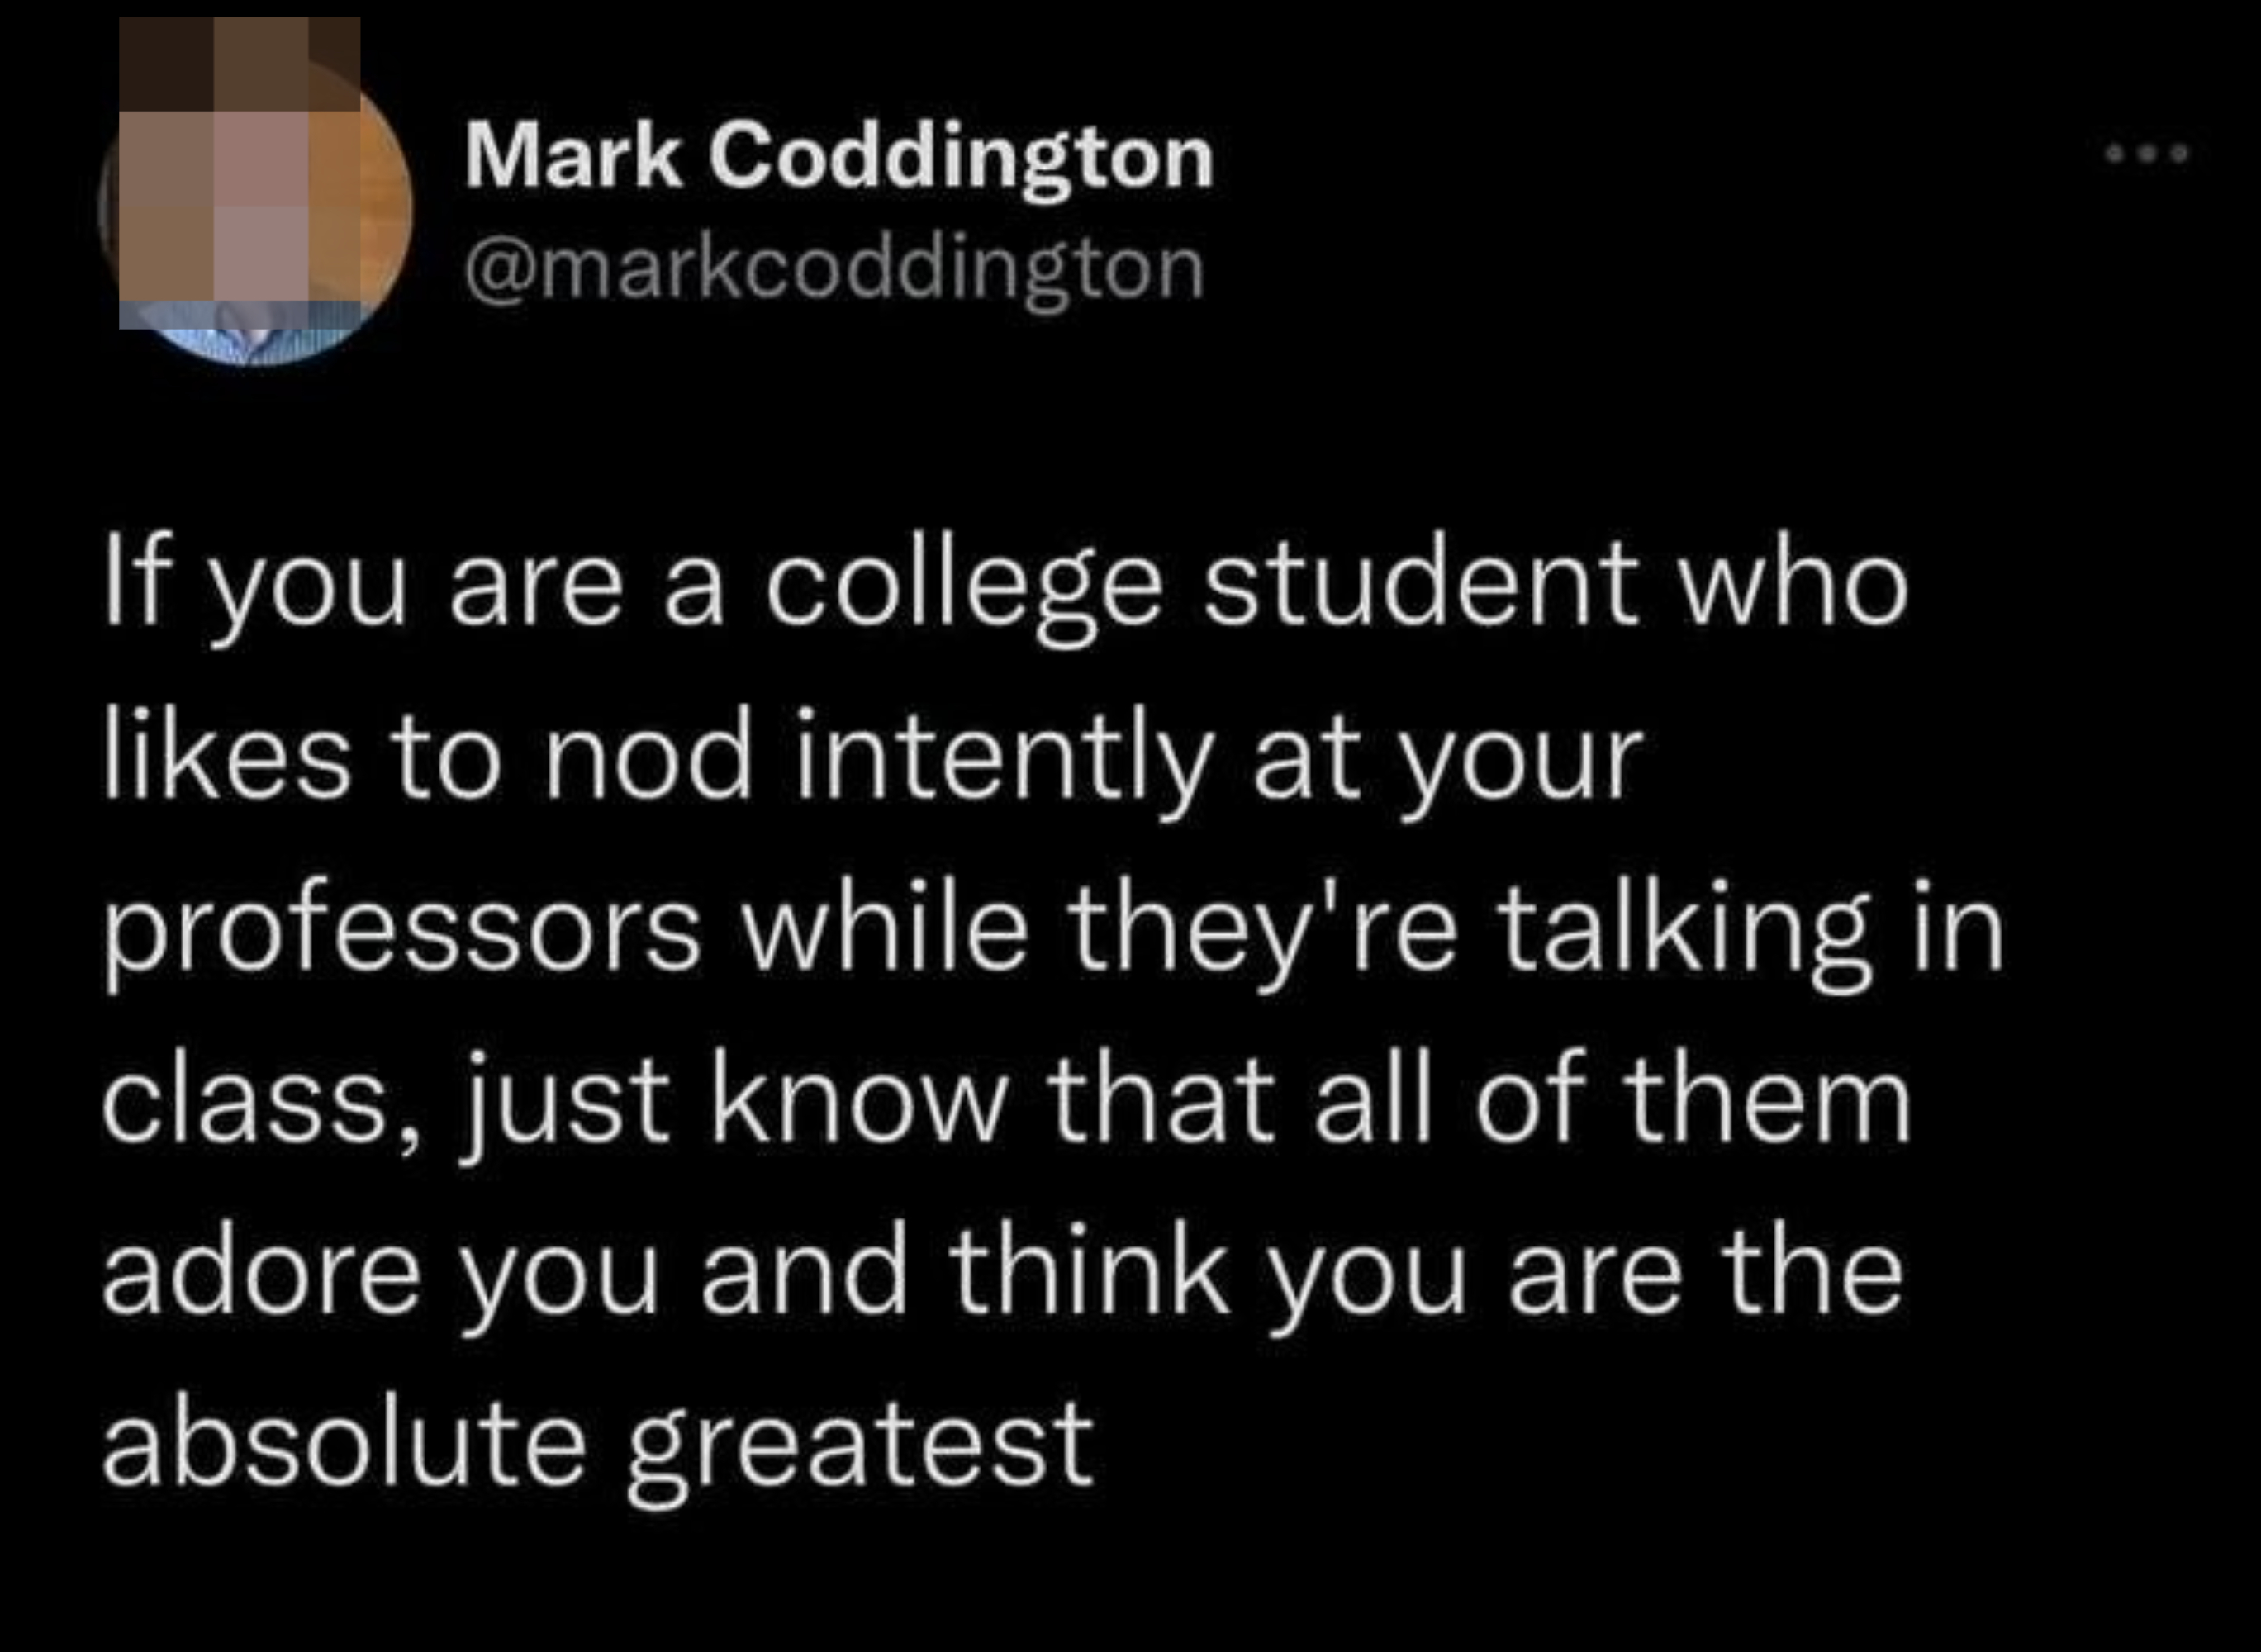 &quot;If you are a college student who likes to nod intently at your professors while they&#x27;re talking in class, just know that all of them adore you and think you are the absolute greatest&quot;